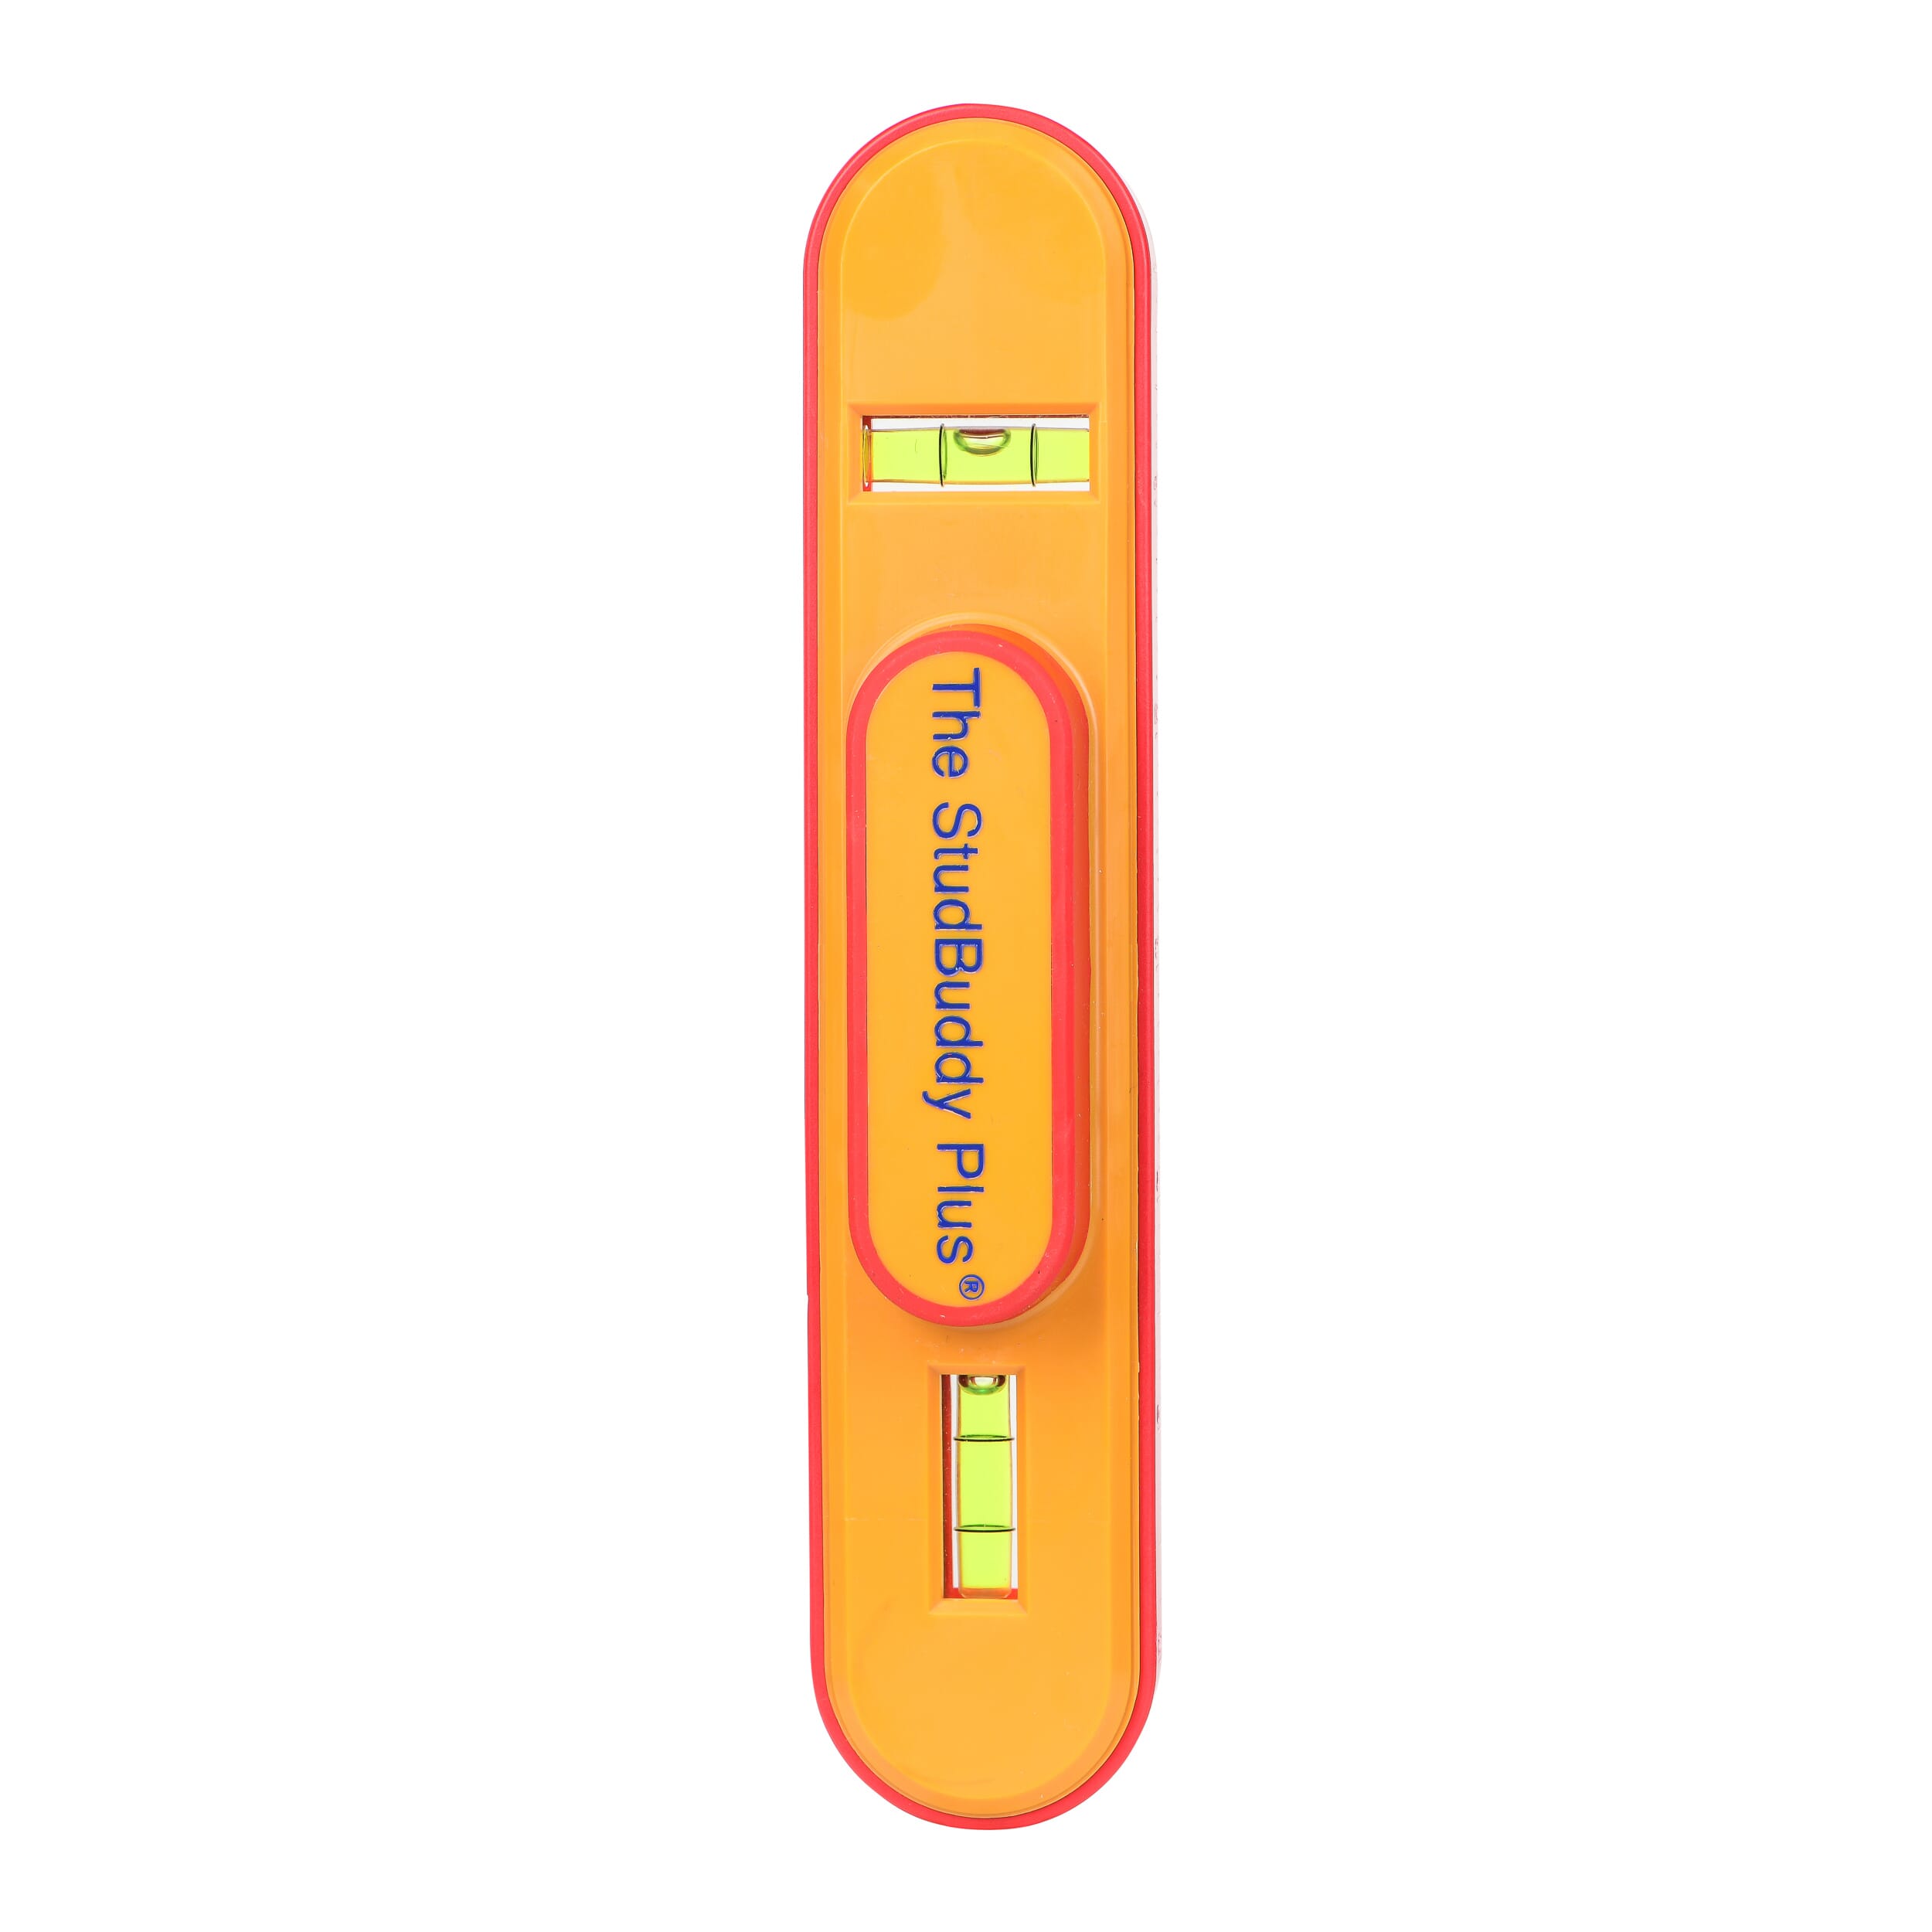 Magnetic Stud Finder - The StudBuddy Plus® - Shakespeare Solutions™